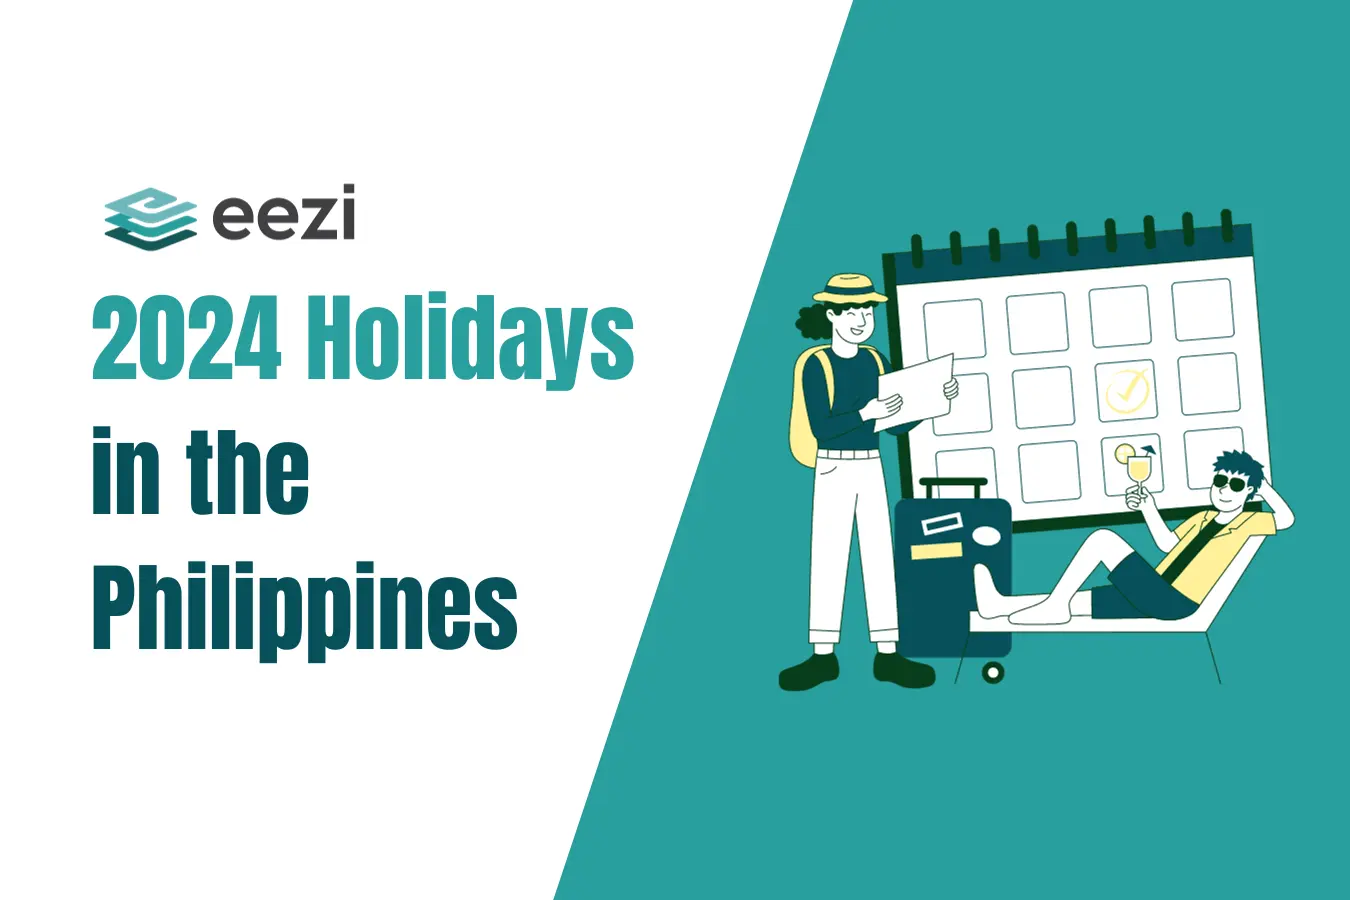 2024 Holidays in the Philippines